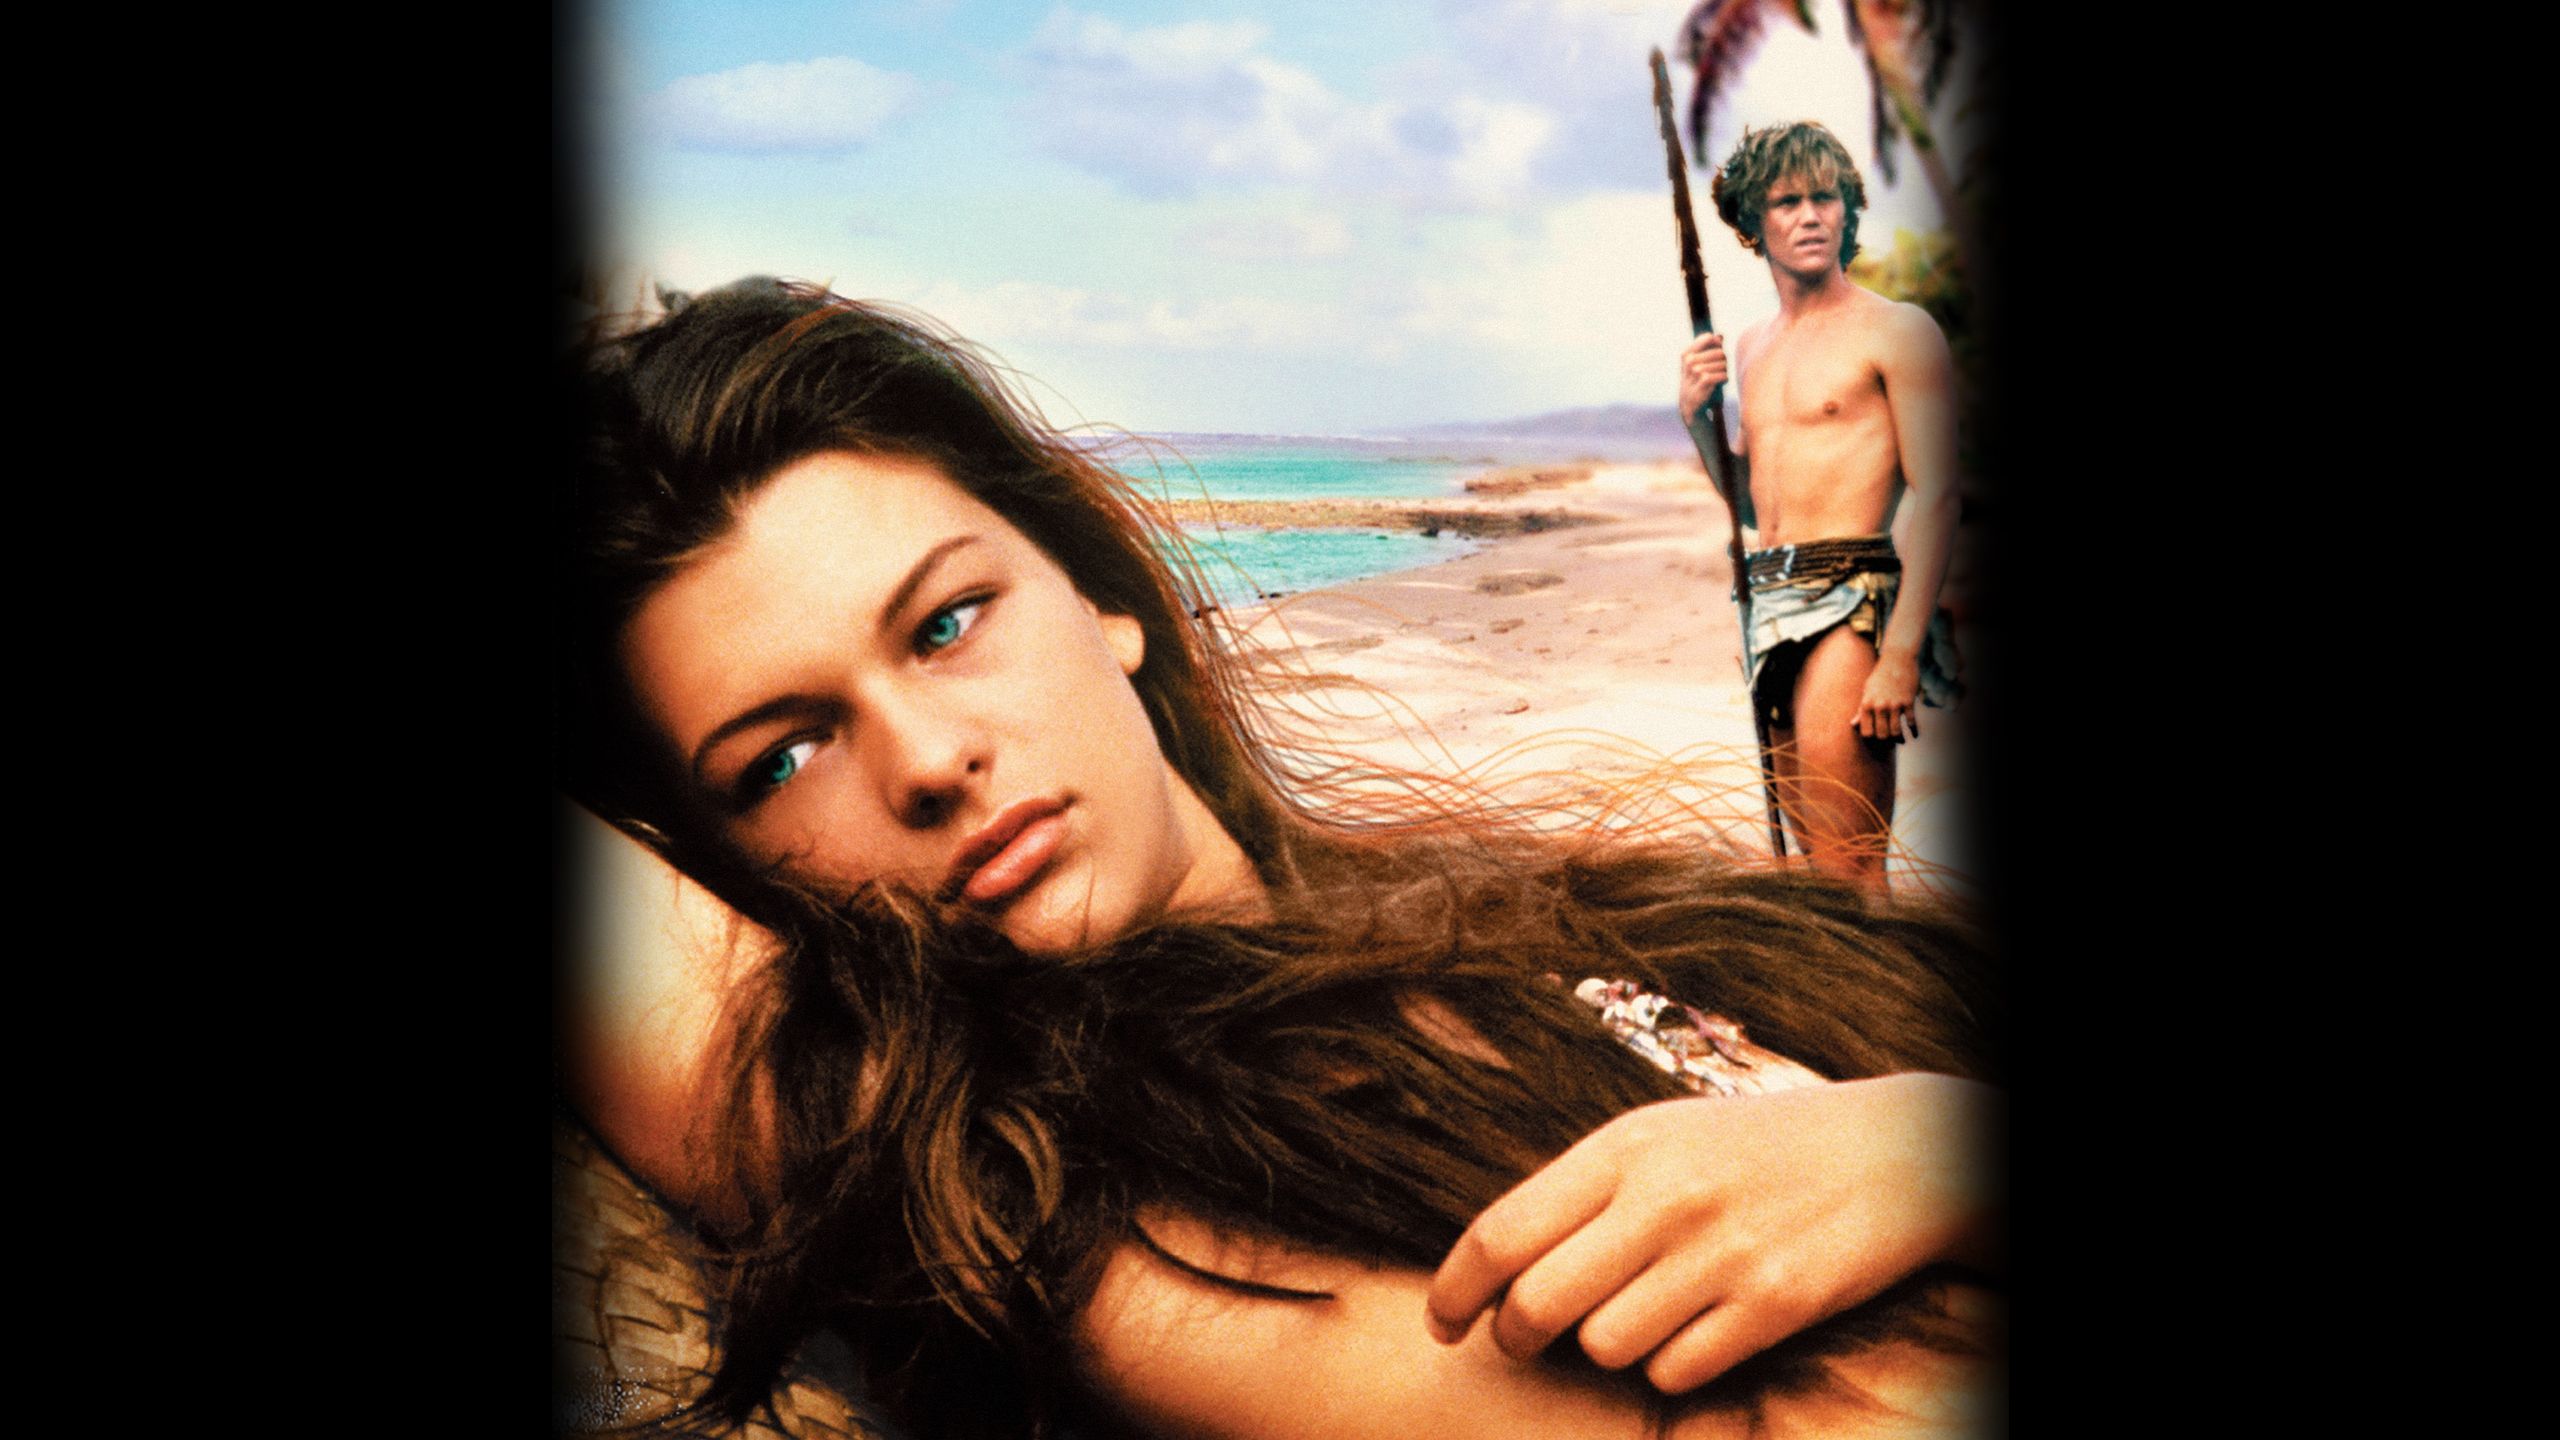 alexis rhodes recommends watch the blue lagoon online free pic